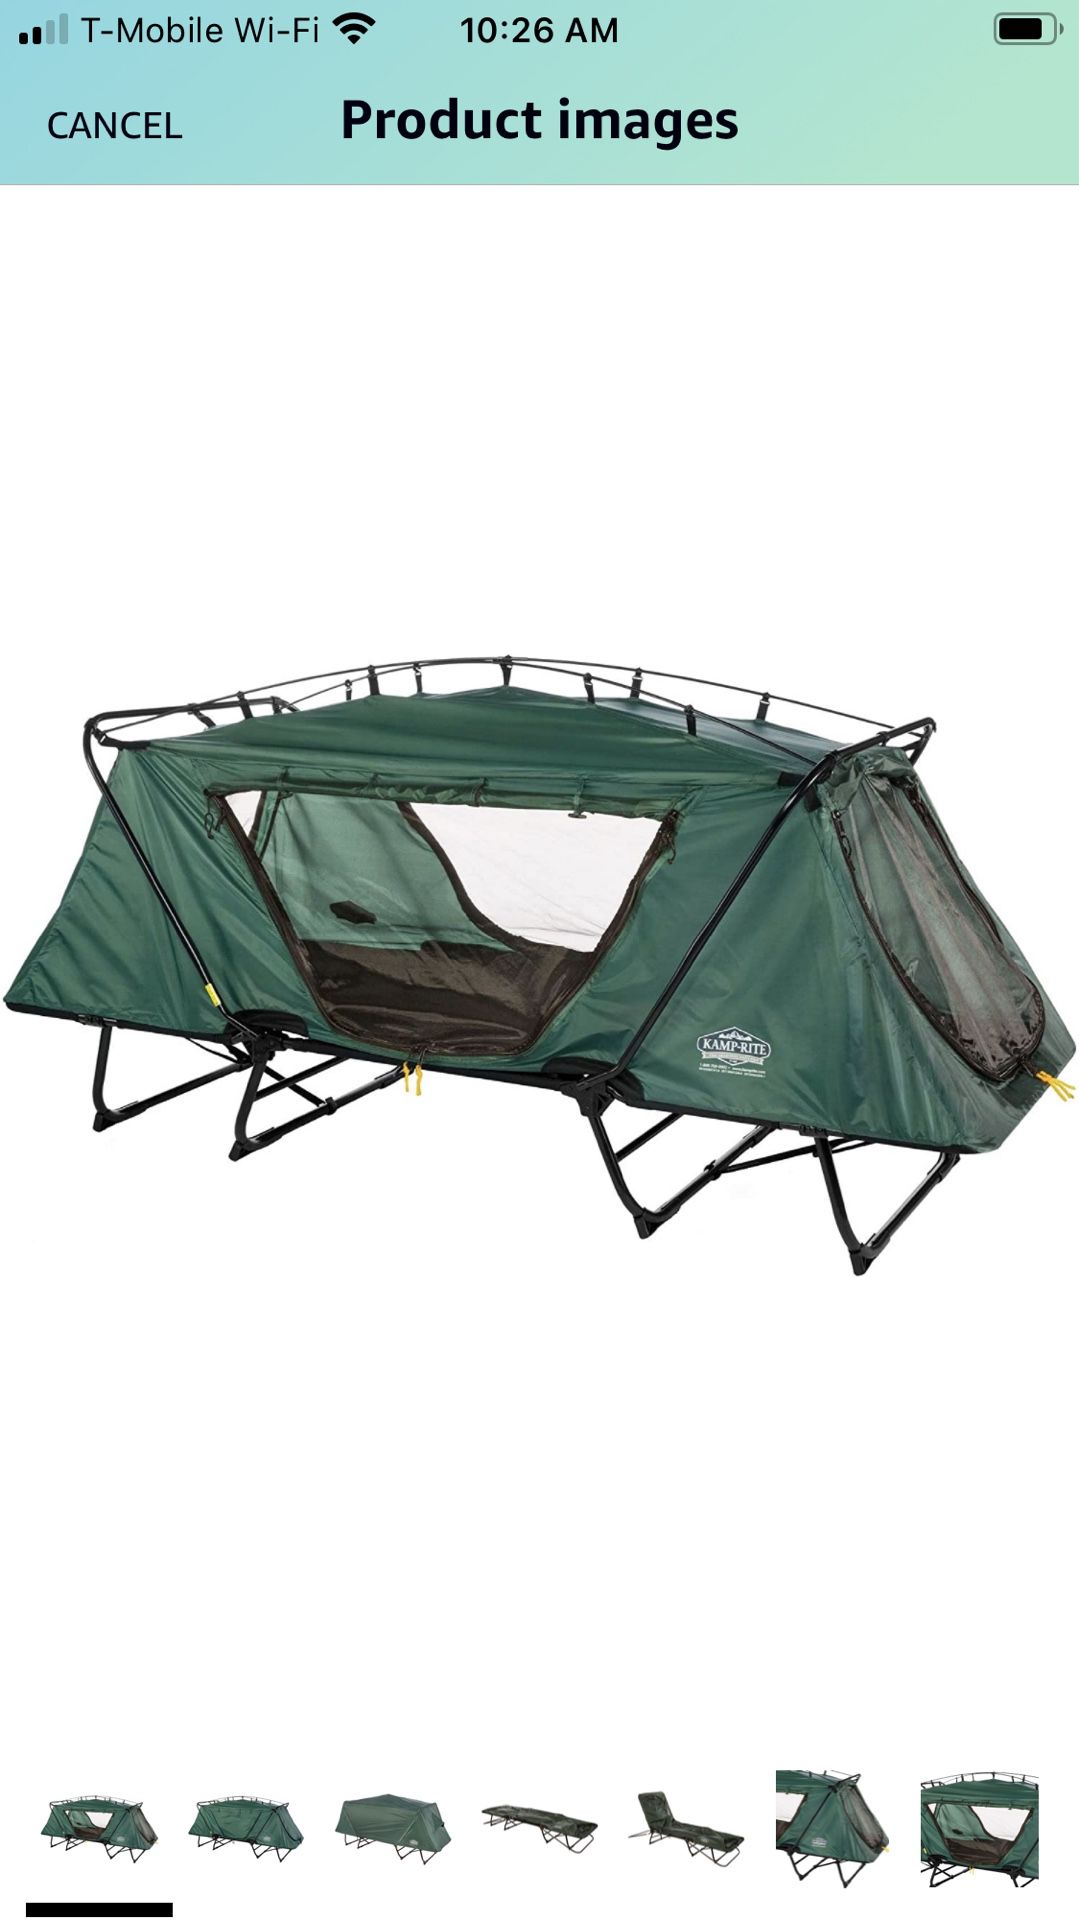 Kamp-Rite Oversize Tent Cot Folding Outdoor Camping Hiking Sleeping Bed